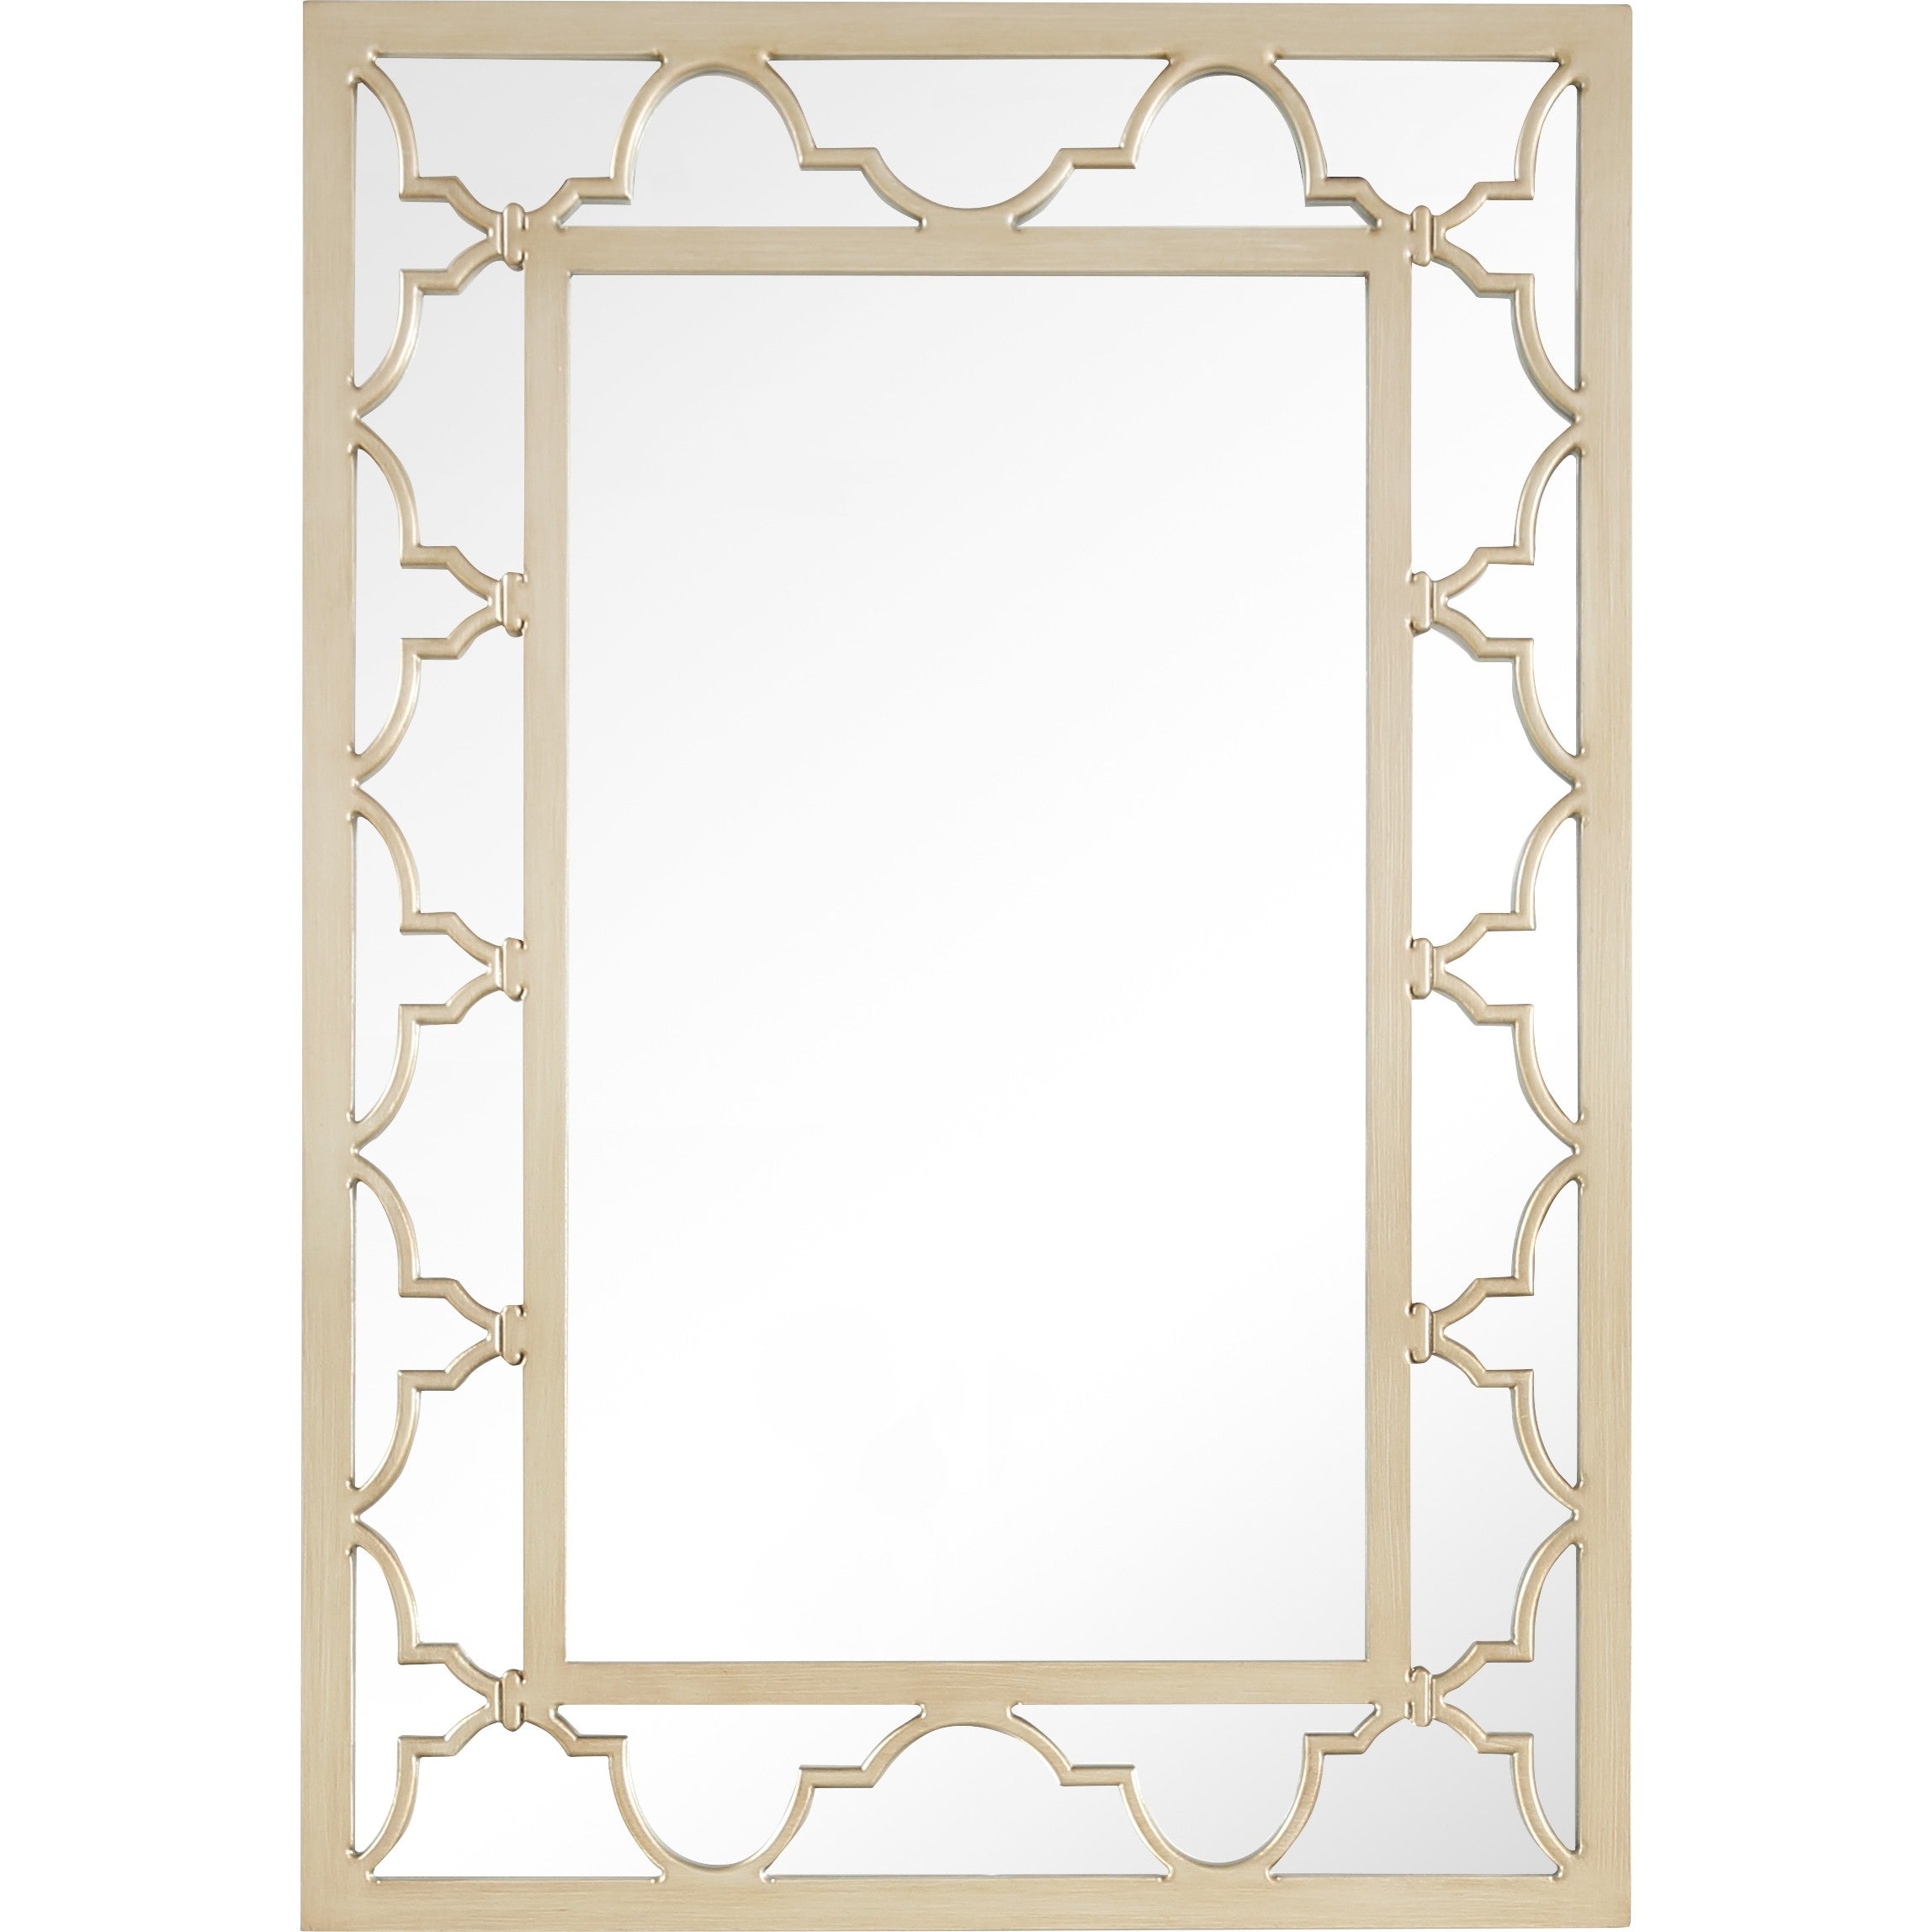 44" Rustic Rectangle Accent Mirror Wall Mounted With Metal Frame